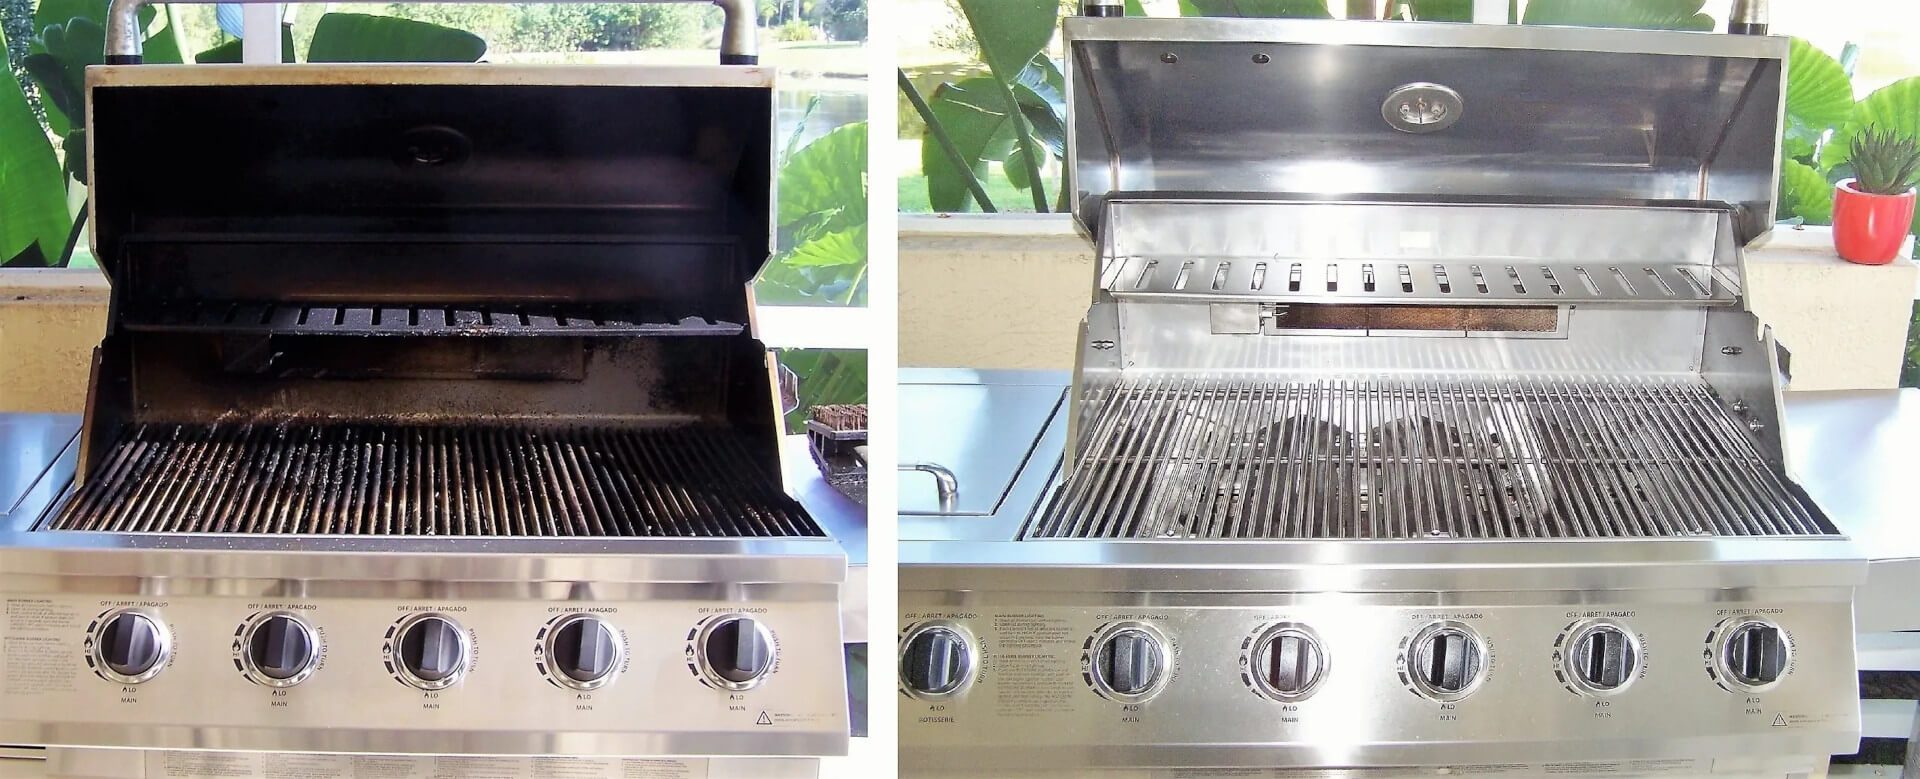 A before and after picture of an outdoor grill.